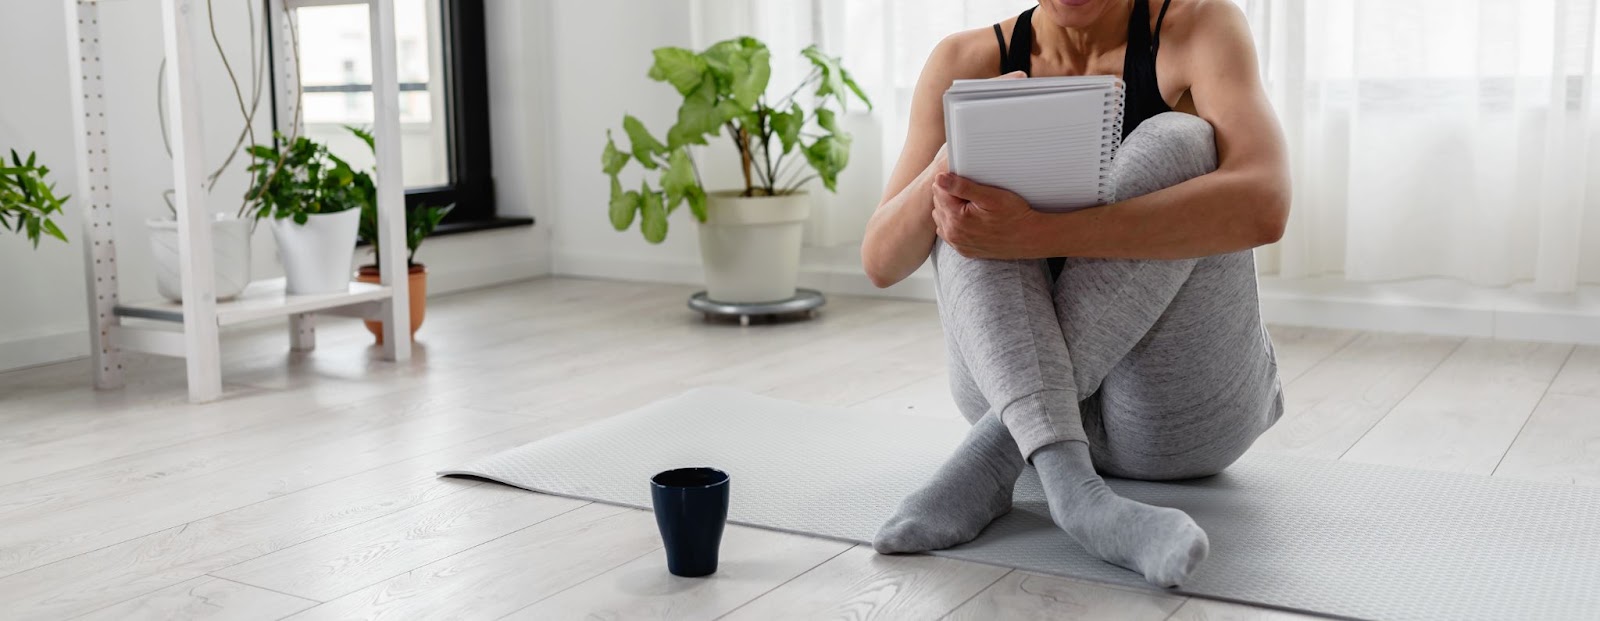 Fit woman, sitting on a yoga mat, planning her workout schedule for the week.